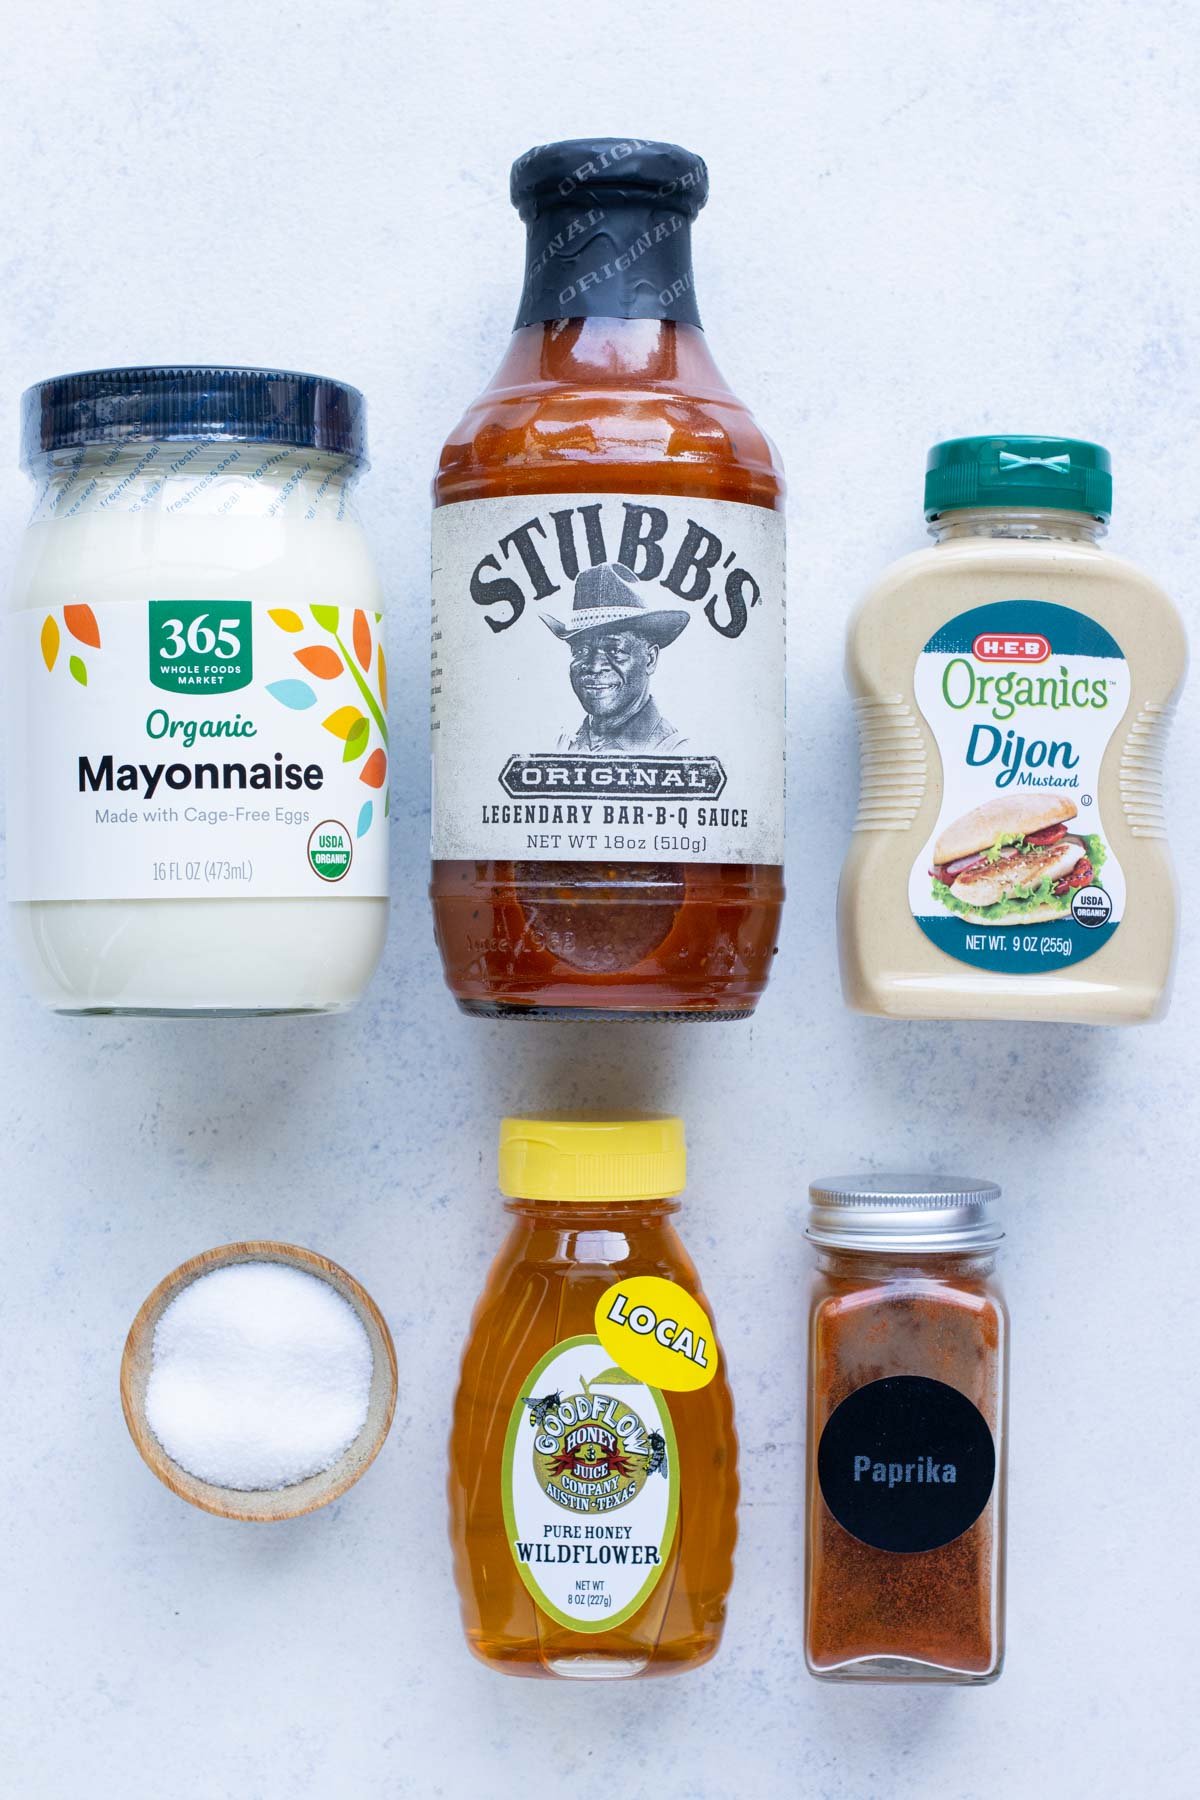 Barbecue sauce, mayonnaise, mustard, honey, paprika, and salt are the ingredients in this sauce.